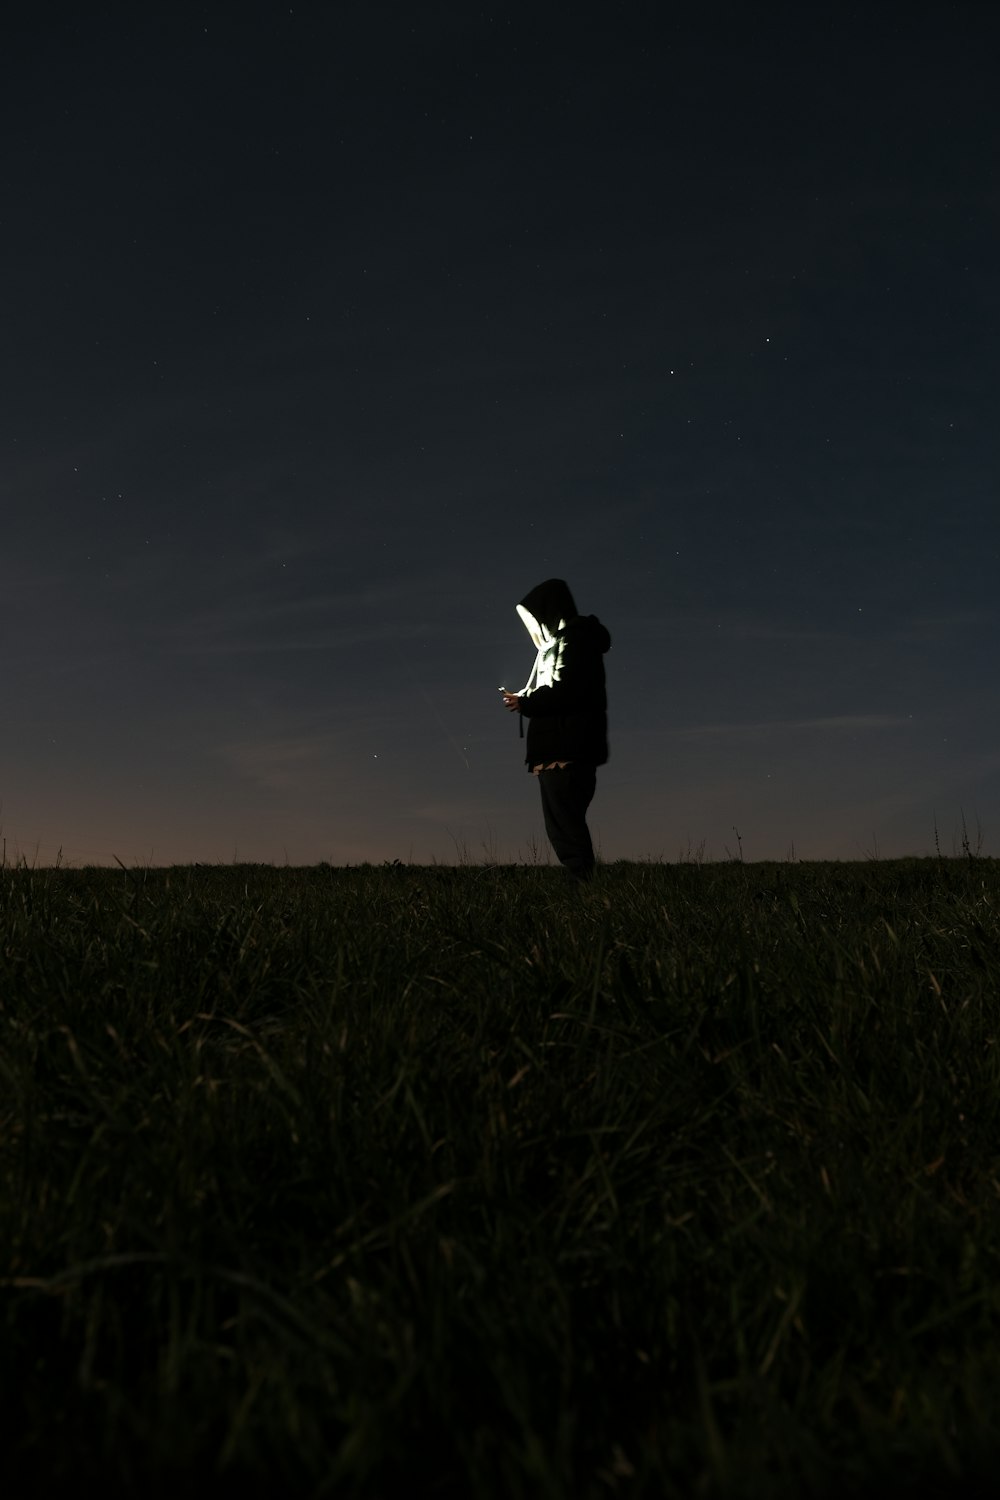 a person standing in a field holding a kite